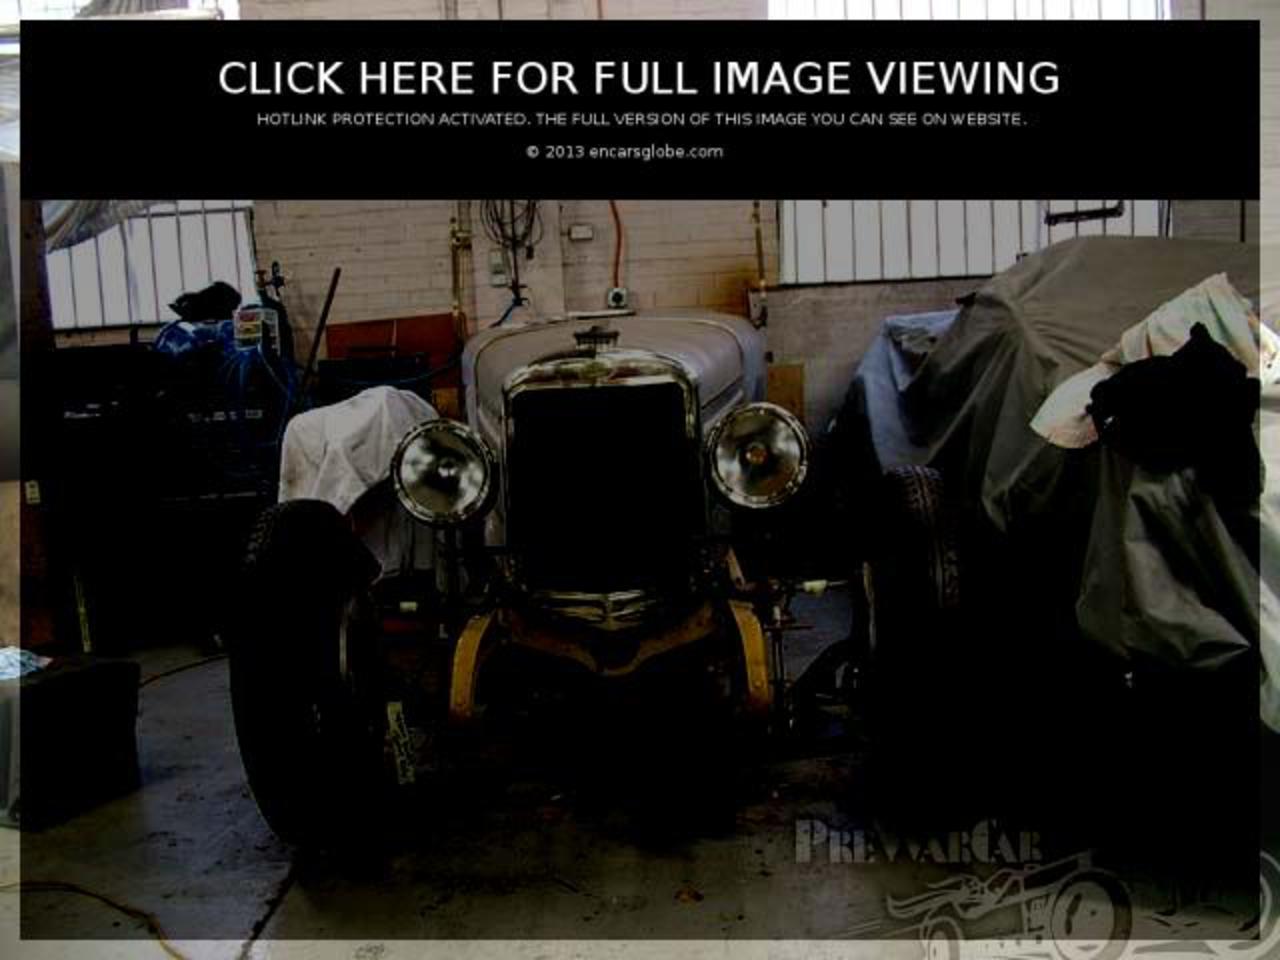 Lanchester 40HP tourer Photo Gallery: Photo #10 out of 8, Image ...